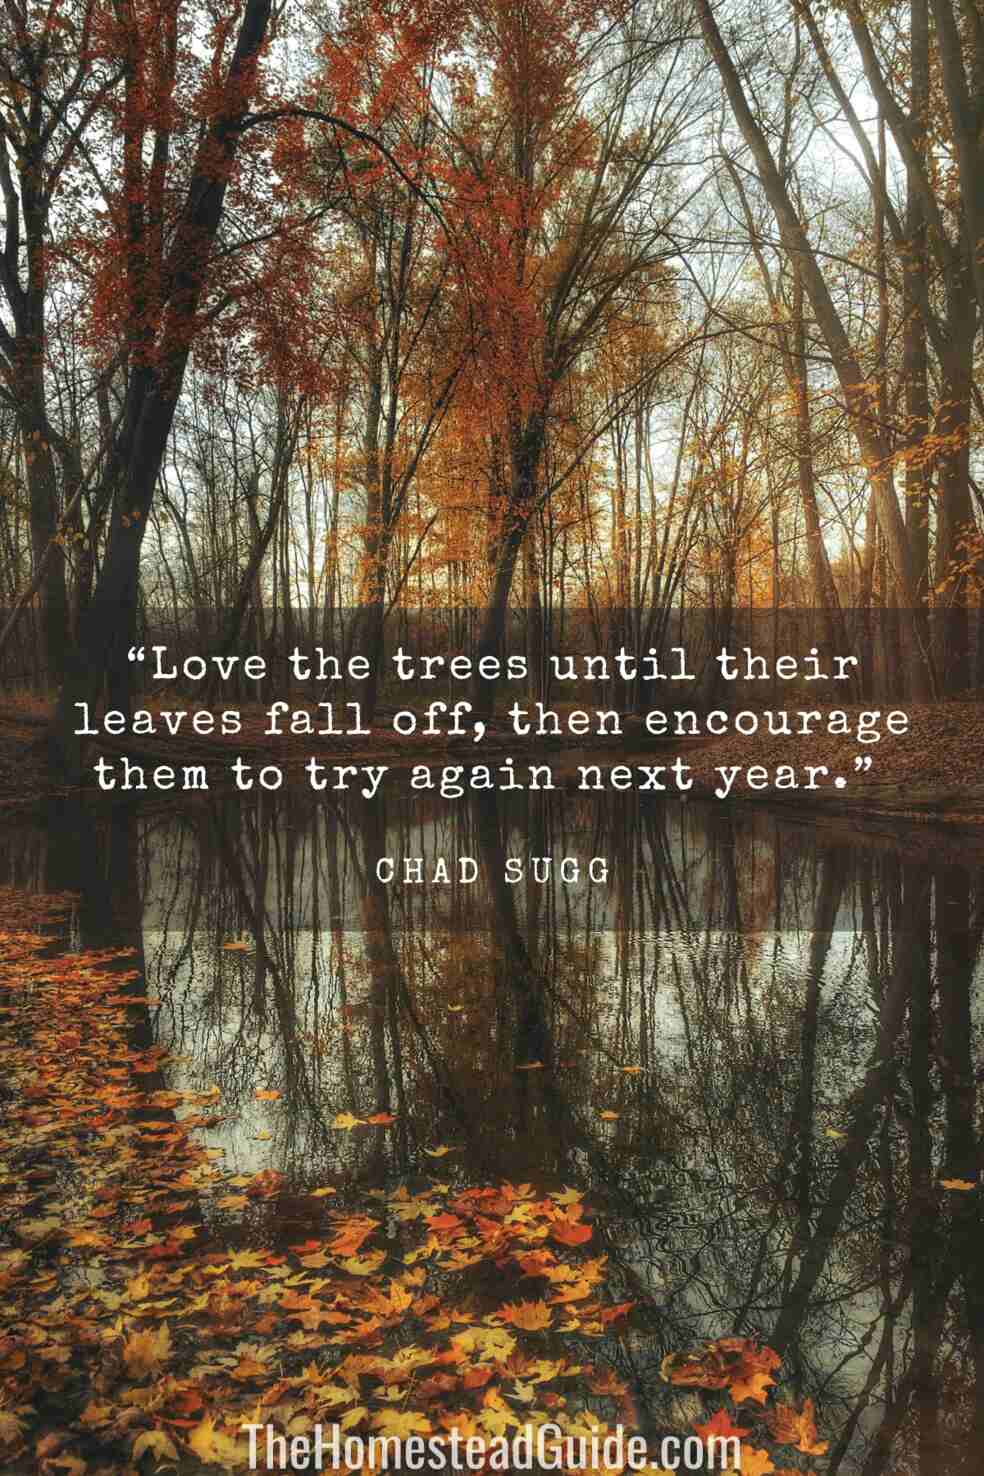 Love the trees until their leaves fall off, then encourage them to try again next year.